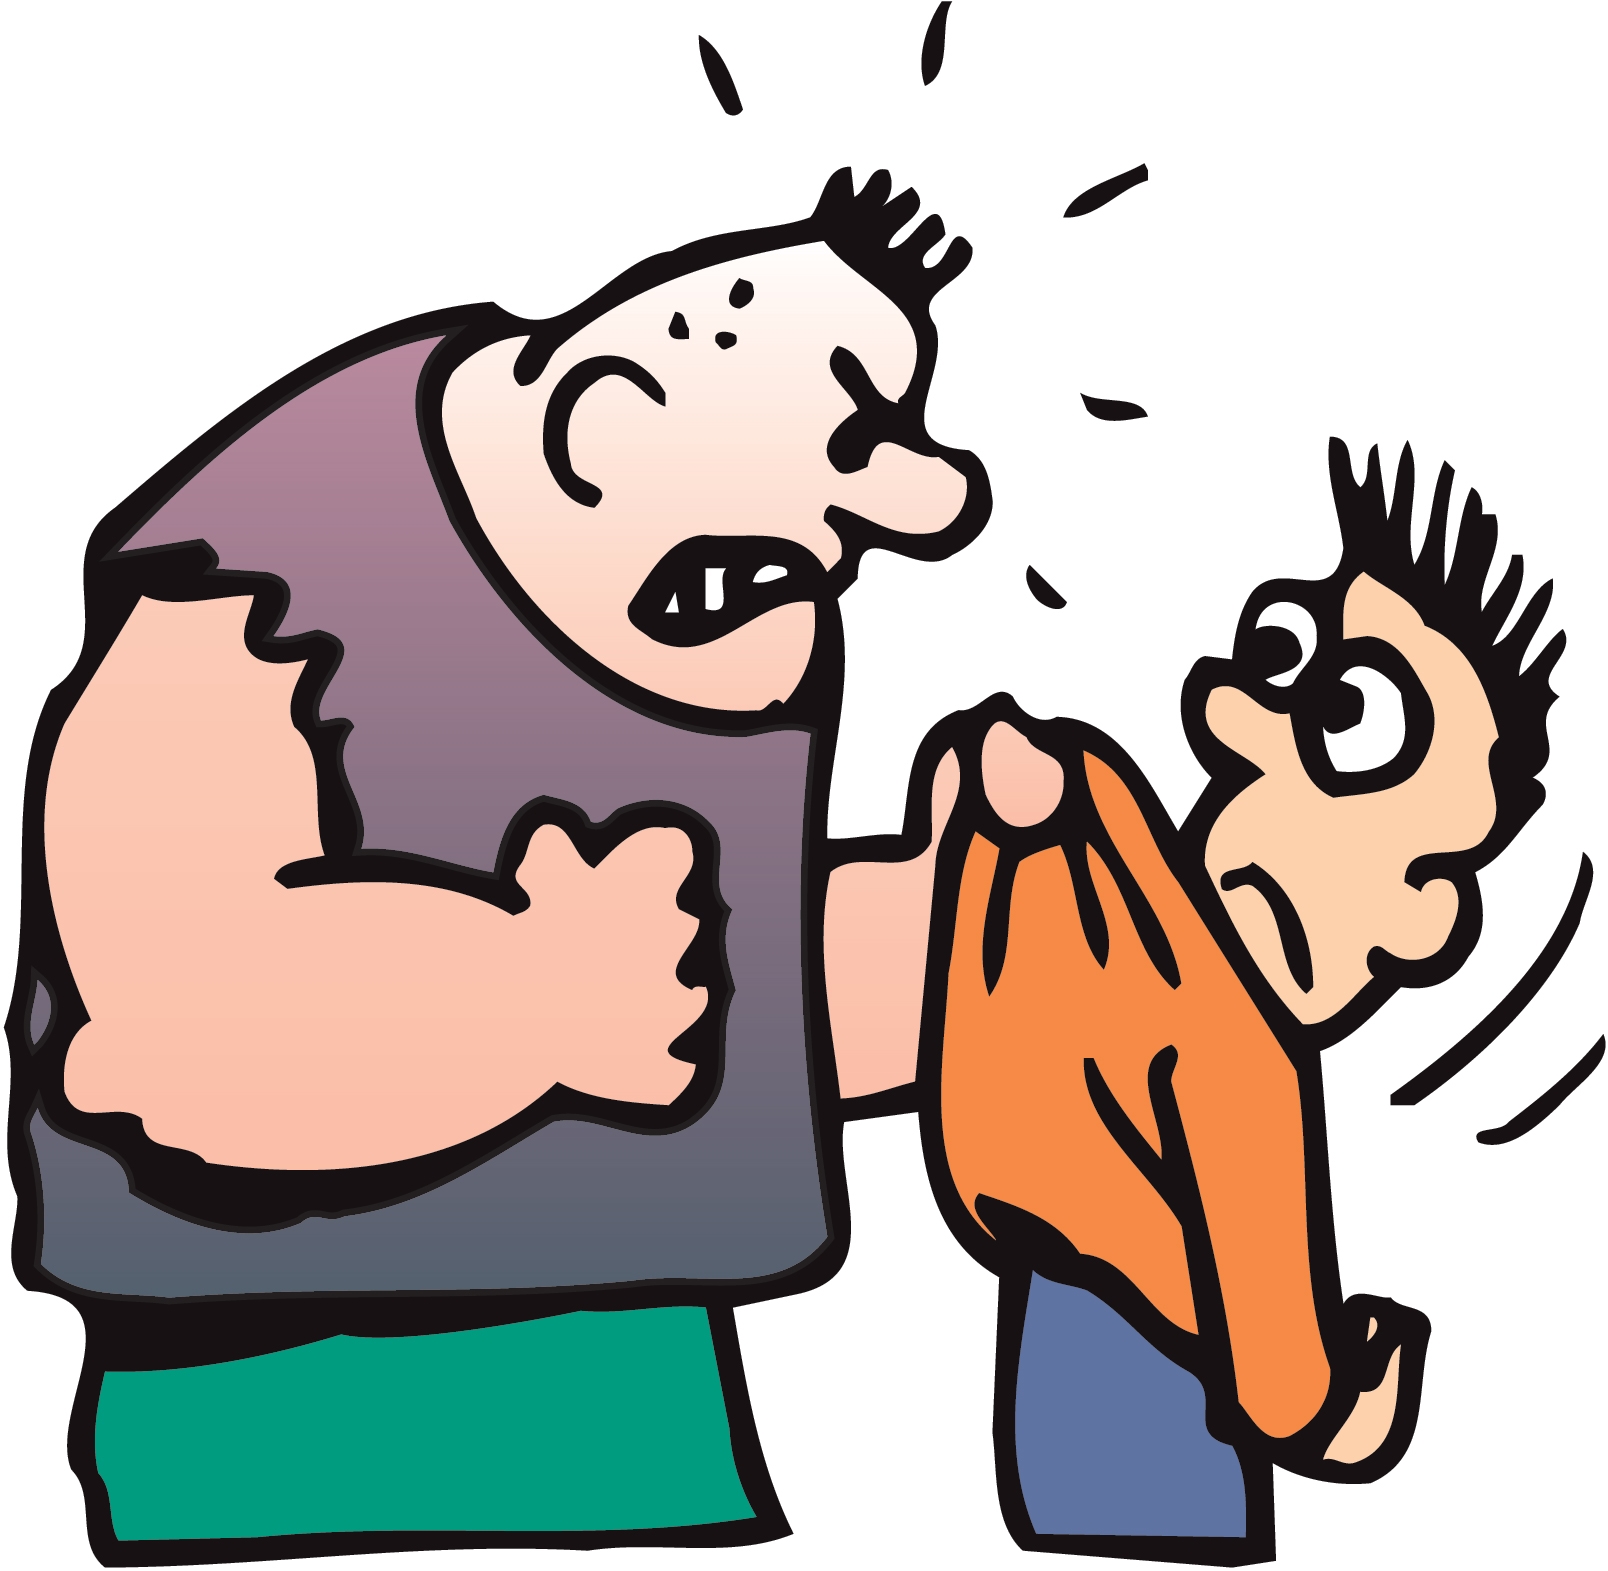 Kid getting beat up clipart.